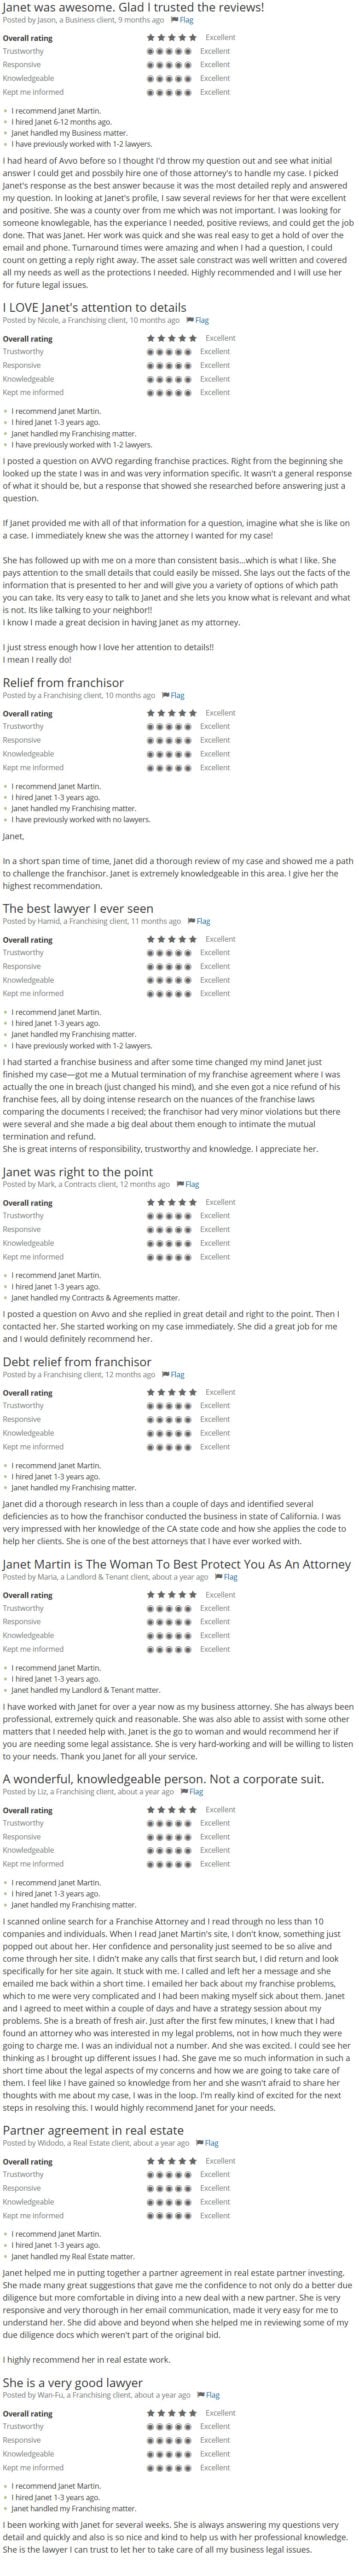 Client Reviews of Janet Martin